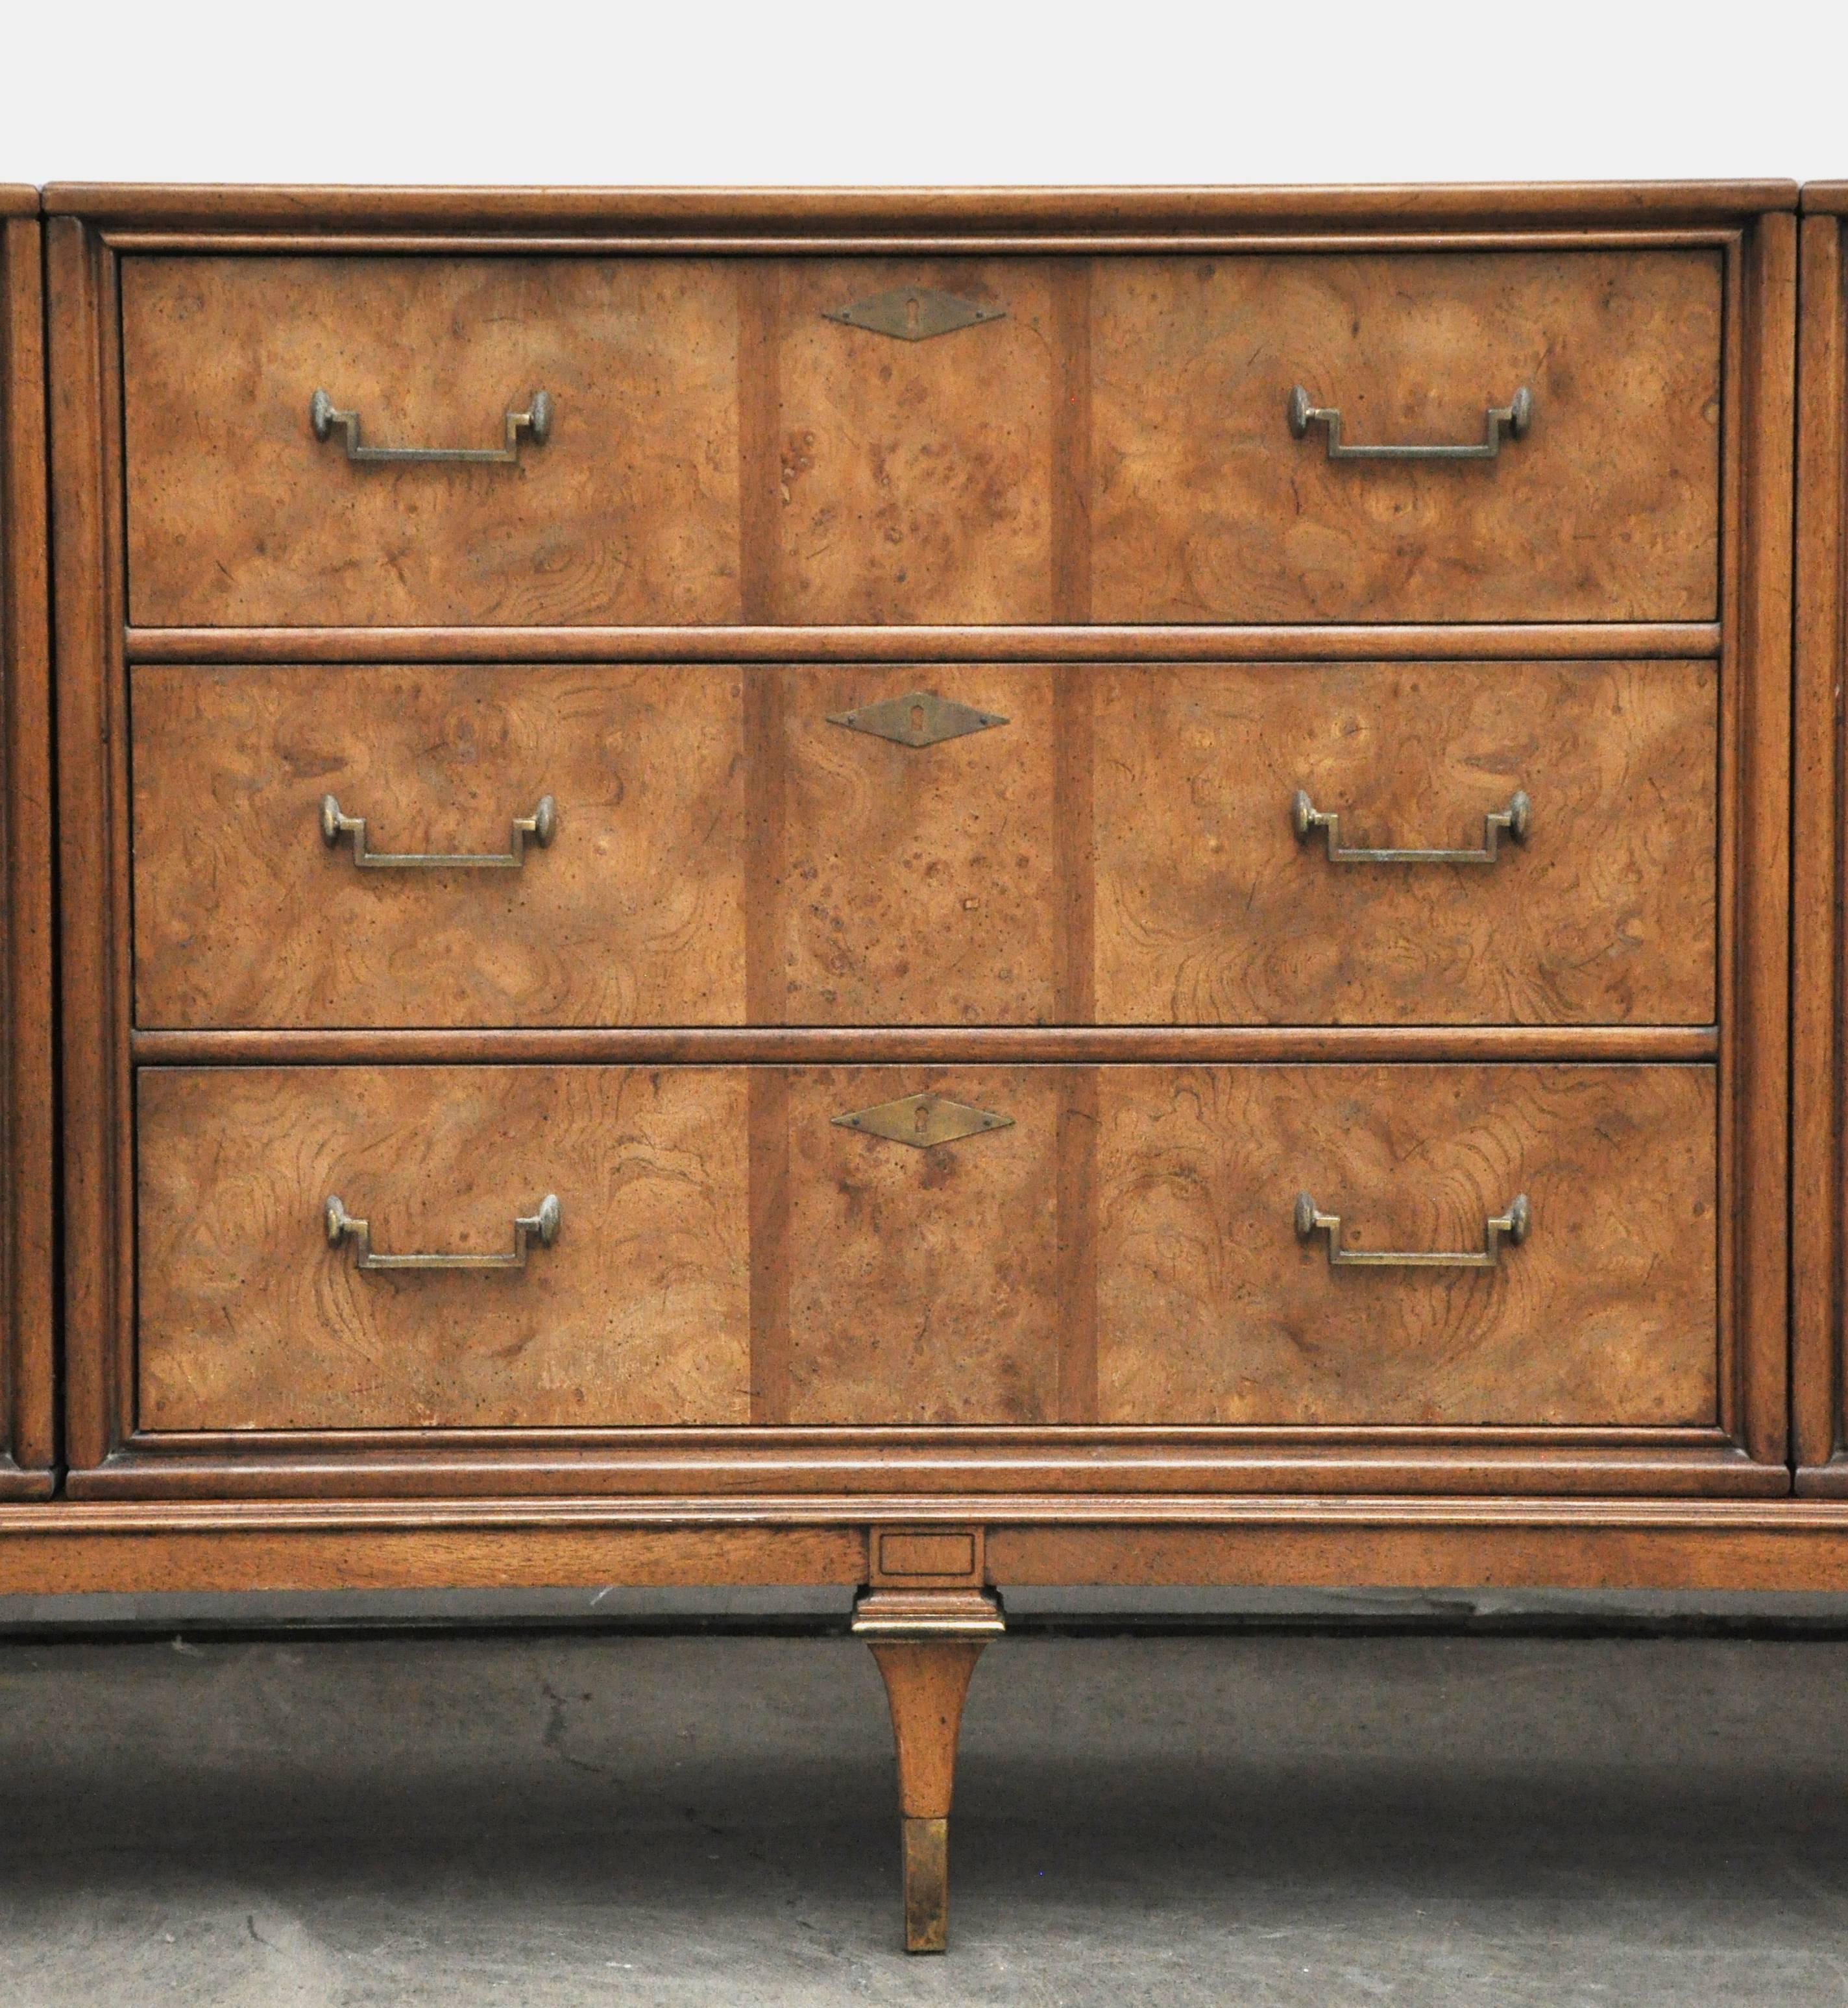 Fine quality Hollywood Regency style Bernhard Rohne for Mastercraft brass and burled wood credenza. Three cabinet pieces on a single plinth base. Beautiful finished back. Total of 11 drawers. Signed Mastercraft.